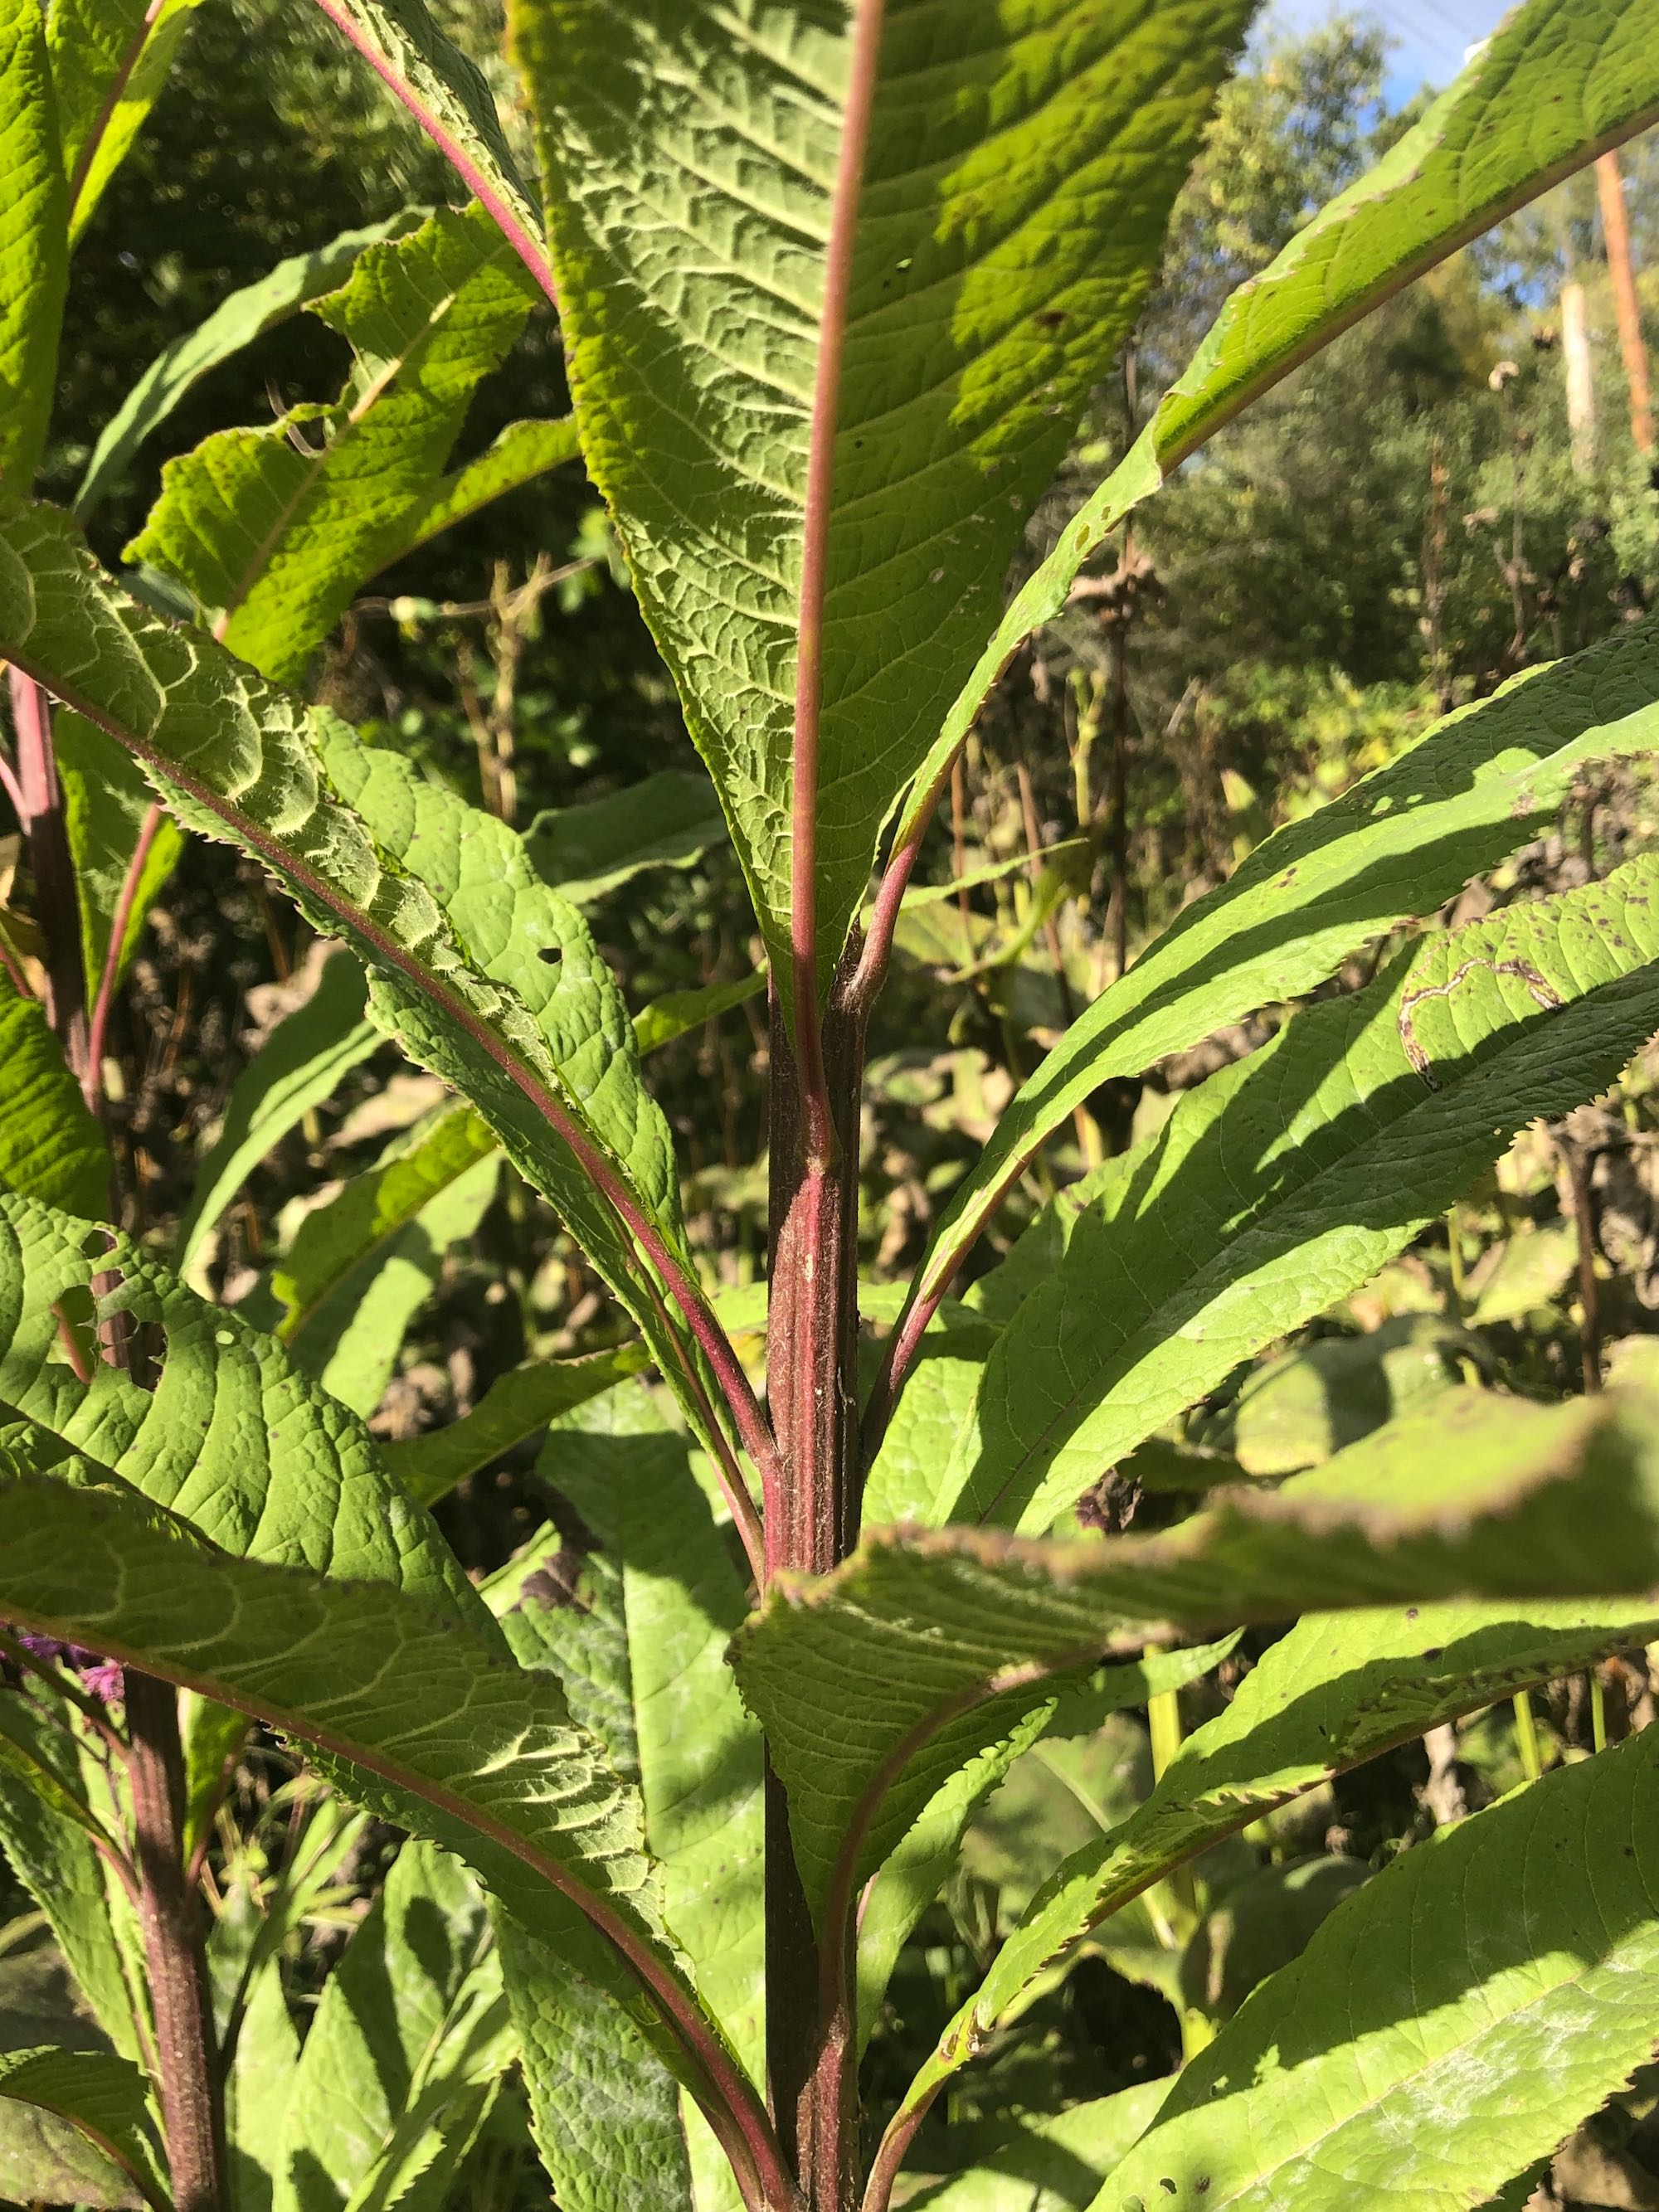 Tall Ironweed stalk in drainage ditch along bikepath between Midvale Blvd. and the Beltline on September 30, 2020.